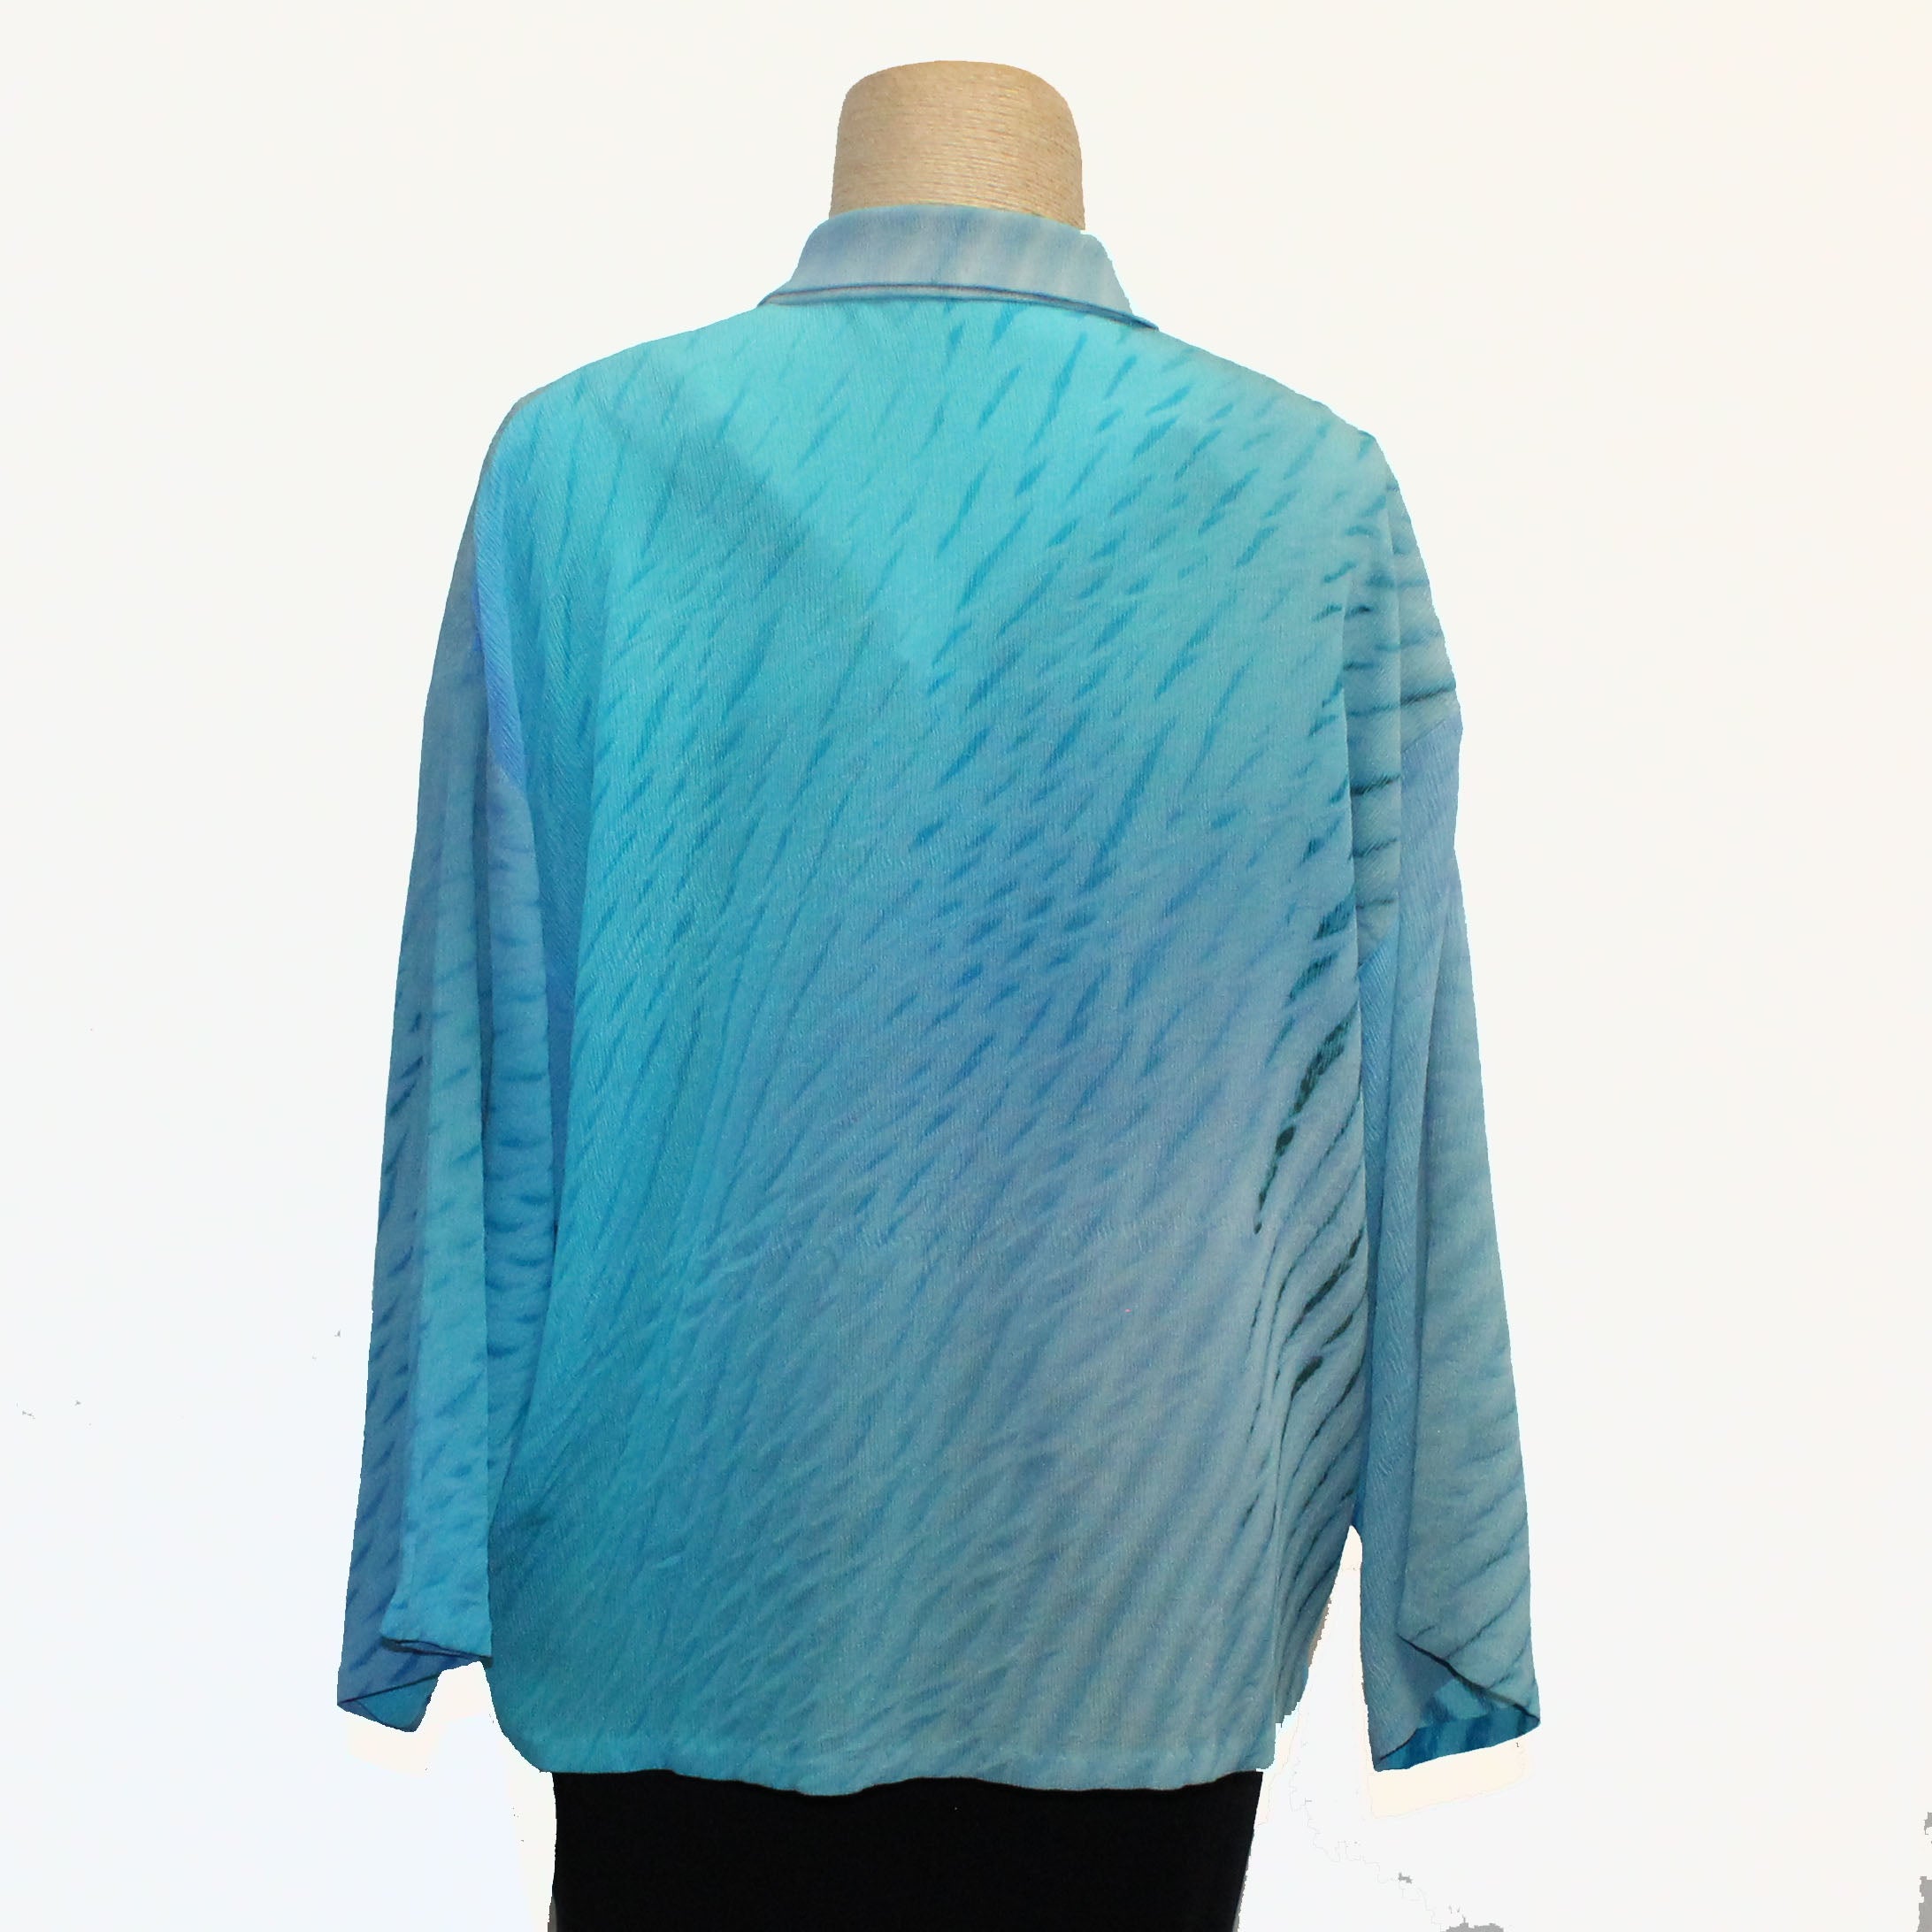 Kiss of the Wolf Top, Kimono, Caribbean/Turquoise/Periwinkle, M